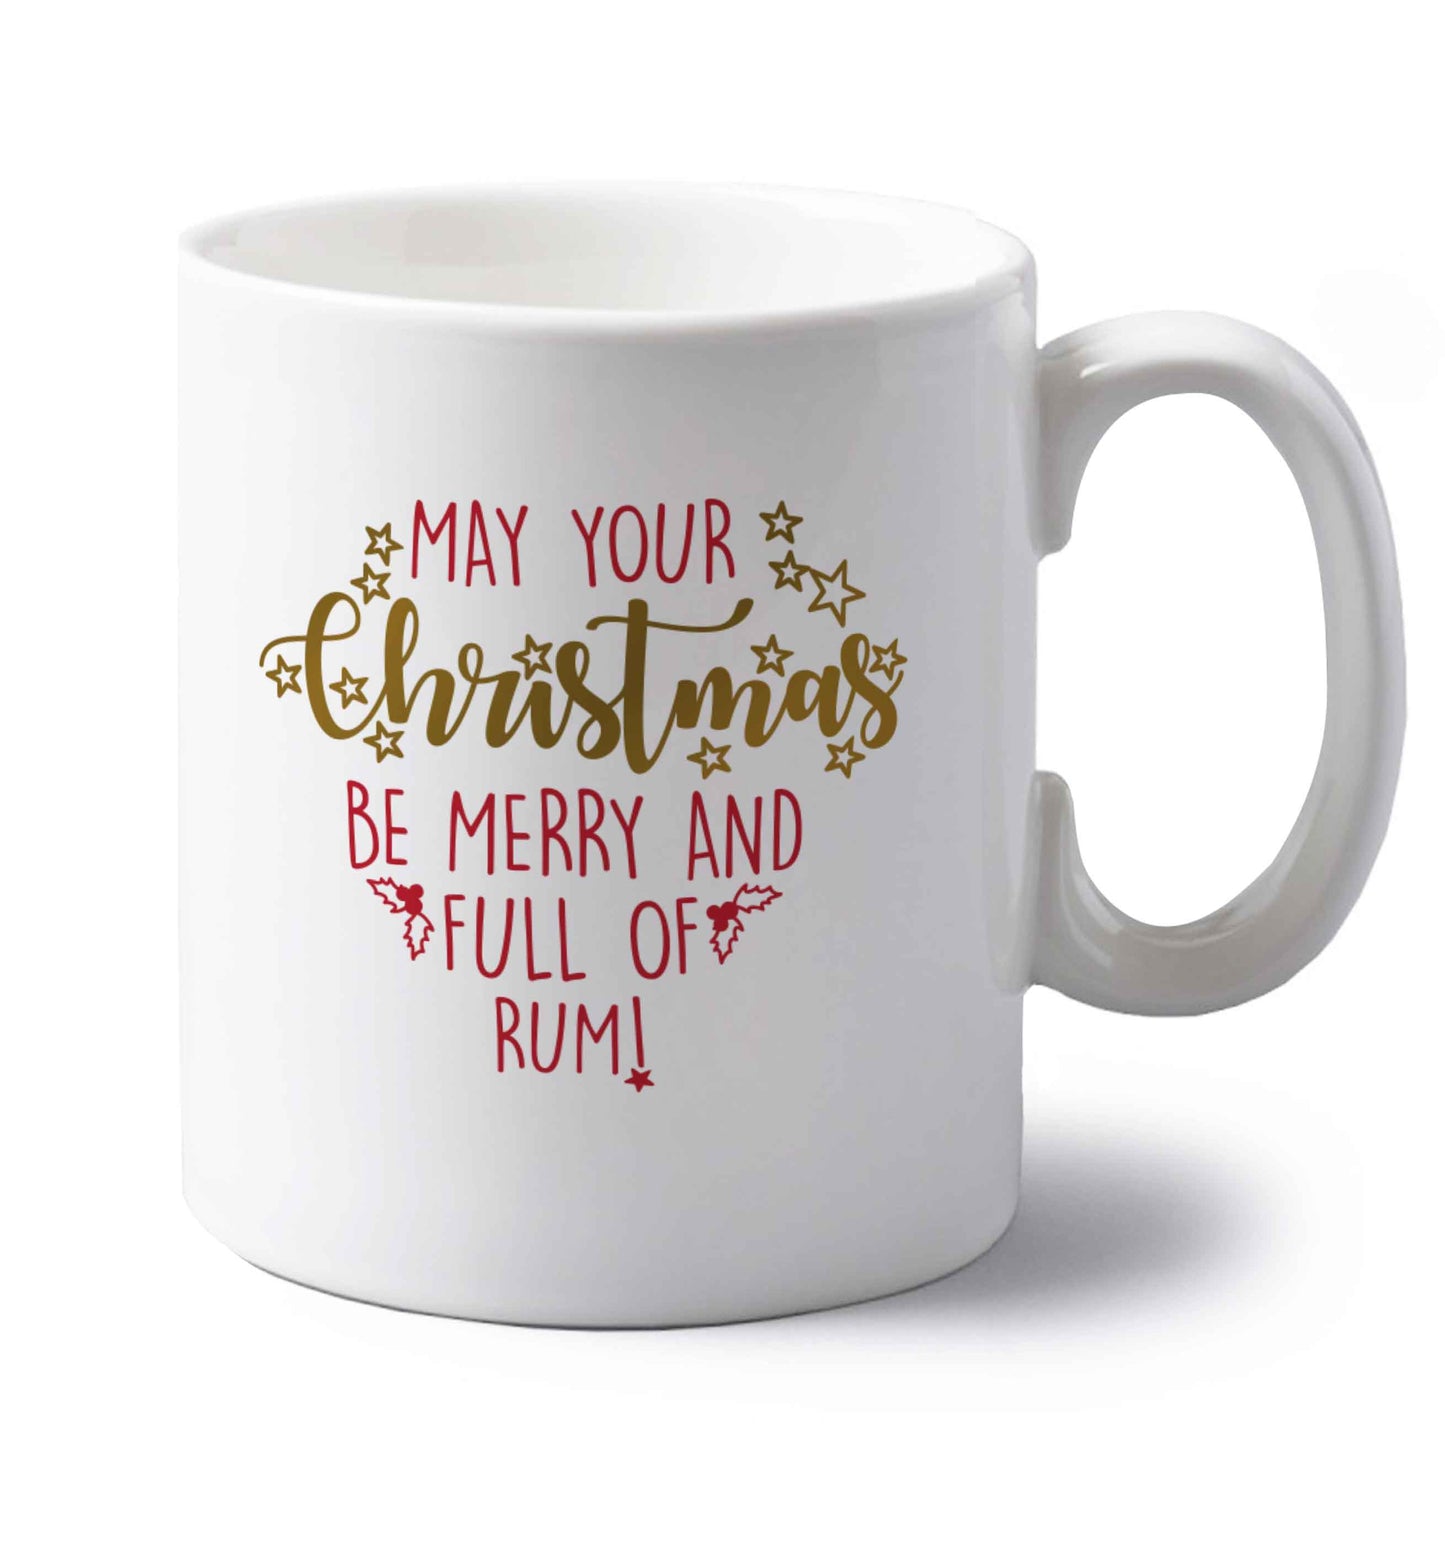 May your Christmas be merry and full of rum left handed white ceramic mug 